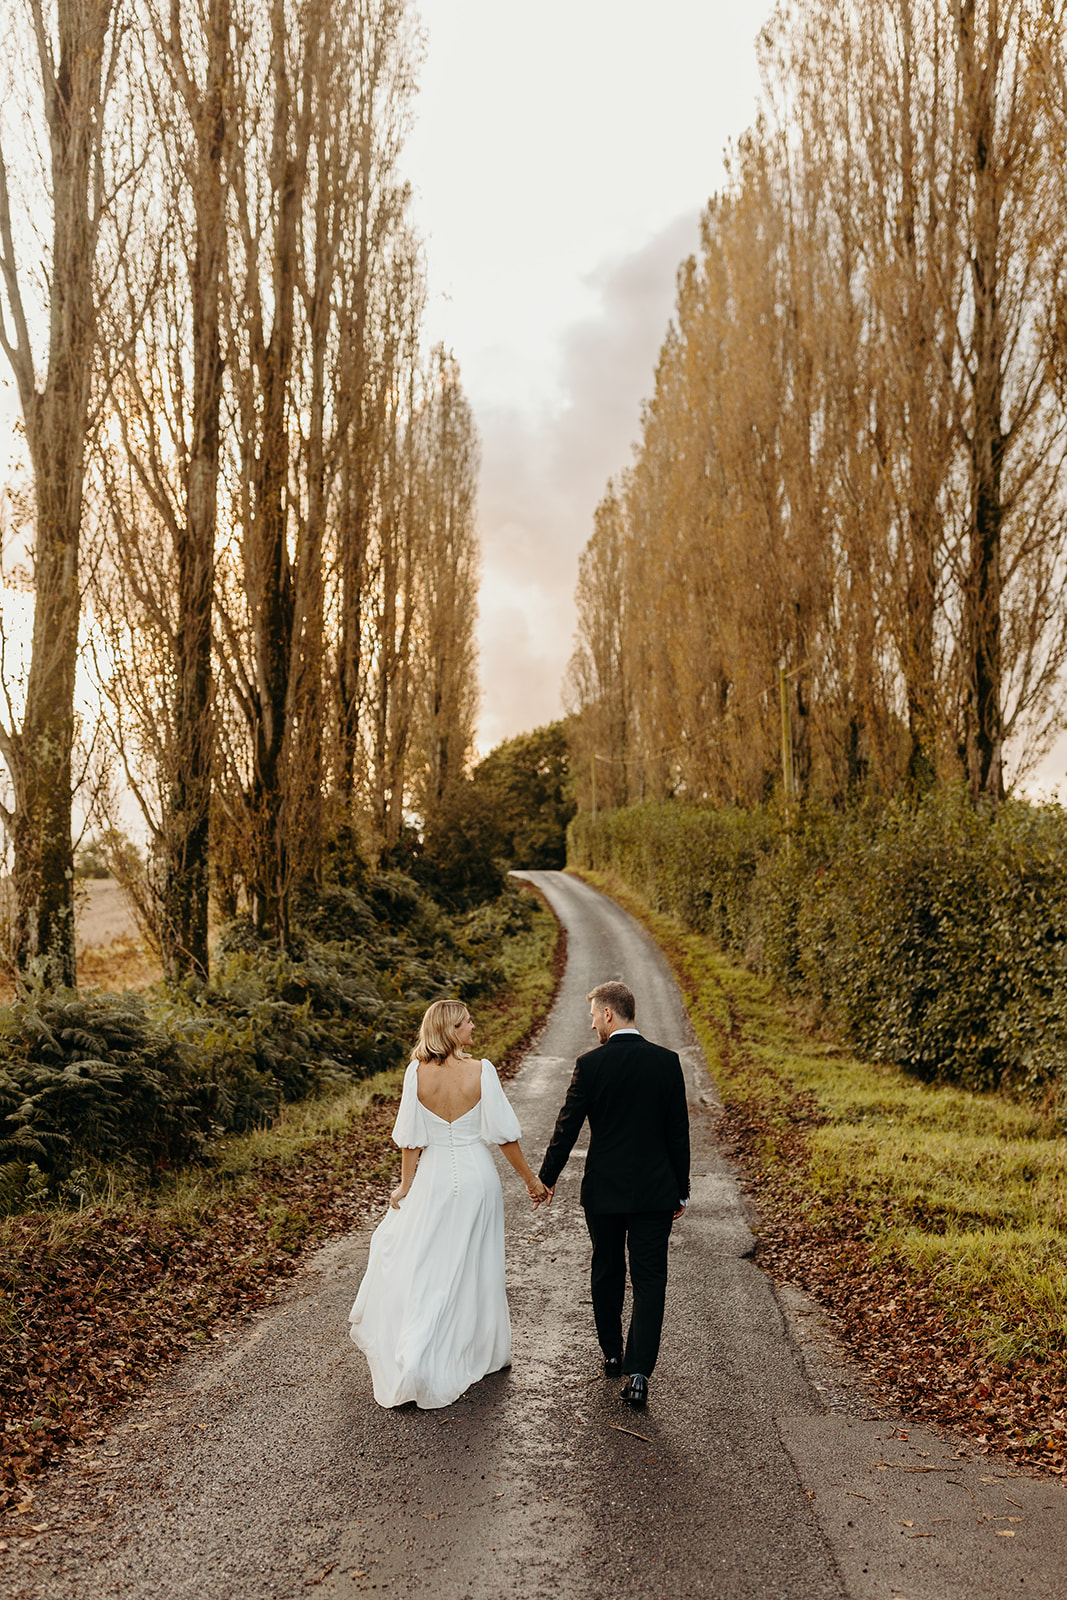 Bride and groom walking together on a pine-lined road leading up to Silchester Farm on their wedding day.